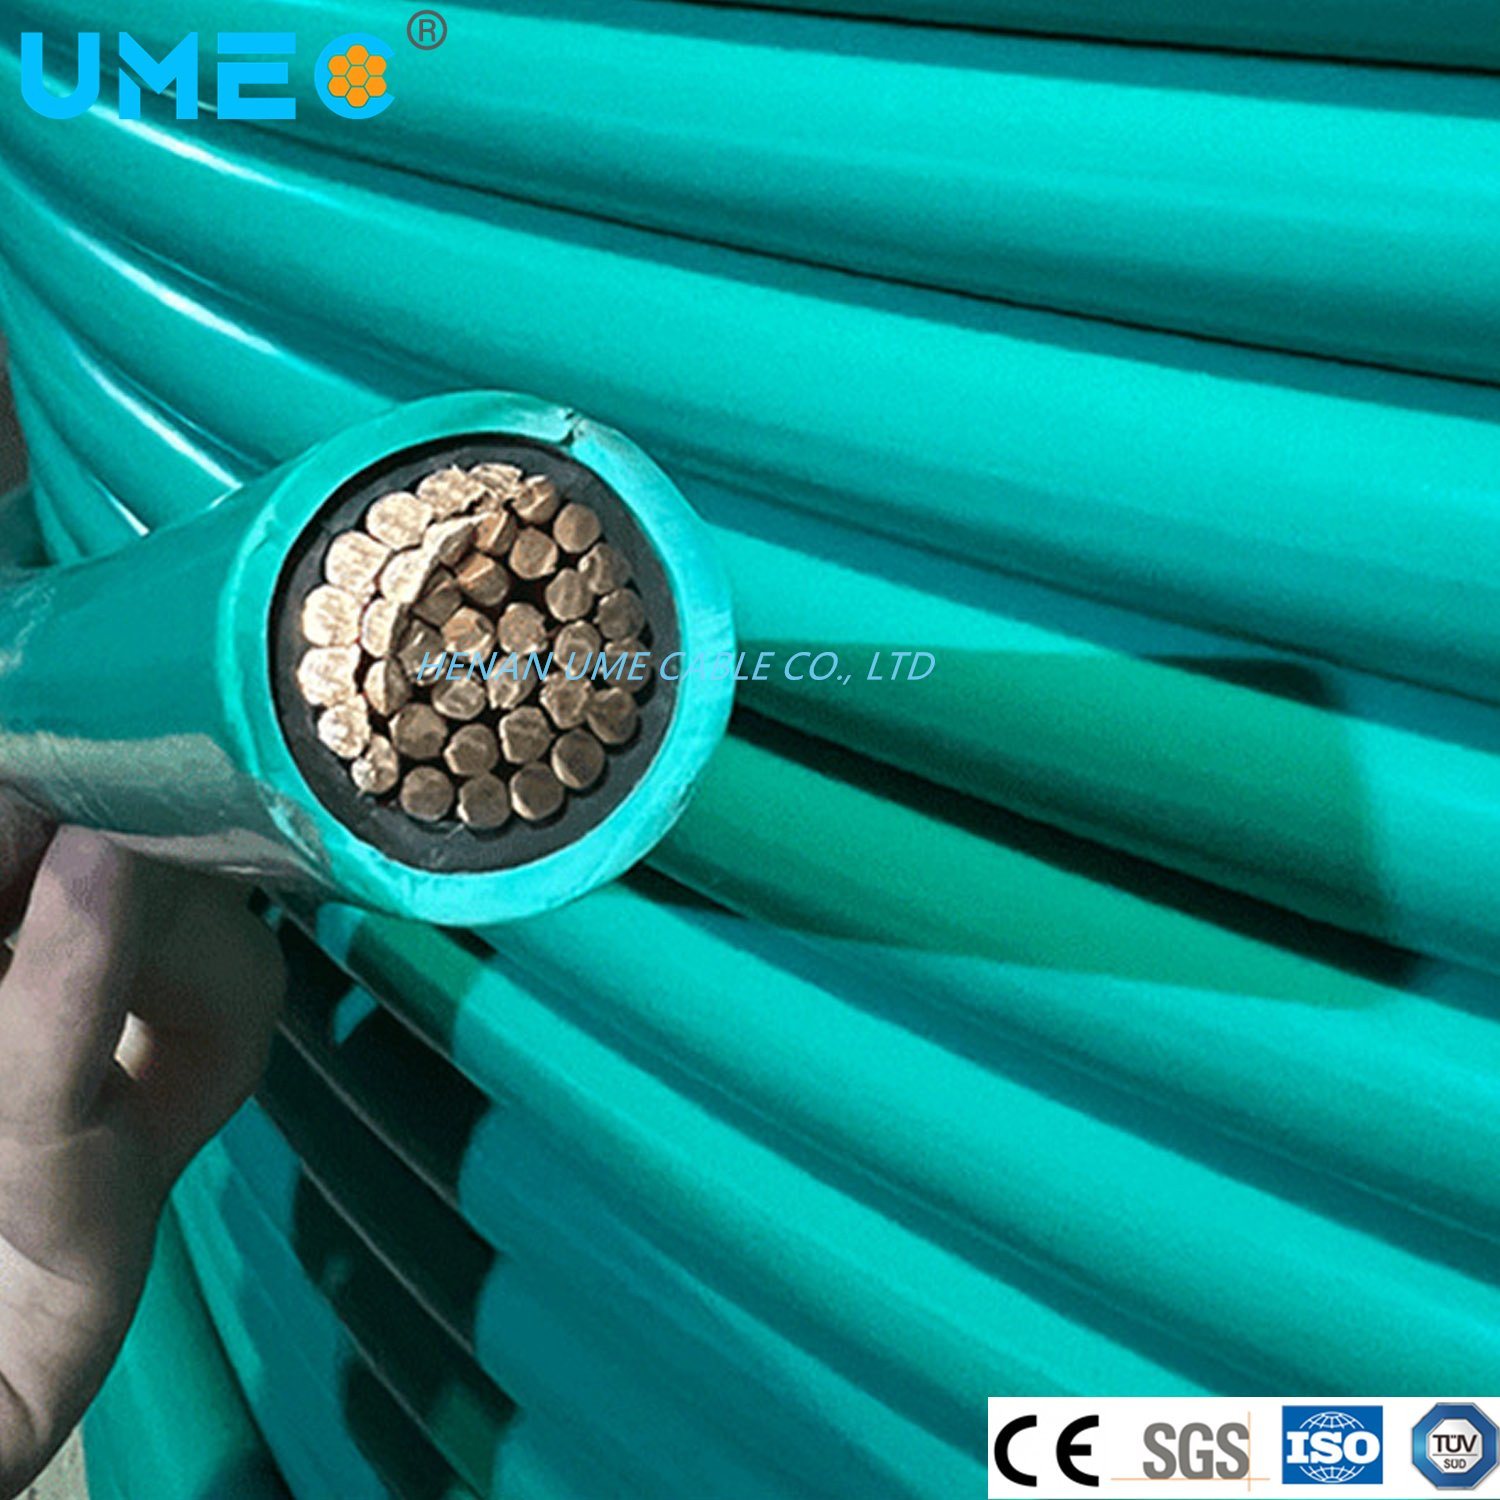 300/500V 450/750V Electrical Copper Aluminum PVC Insulated Sheath Cable for Building Wire Installed in Conduit Electric Wire